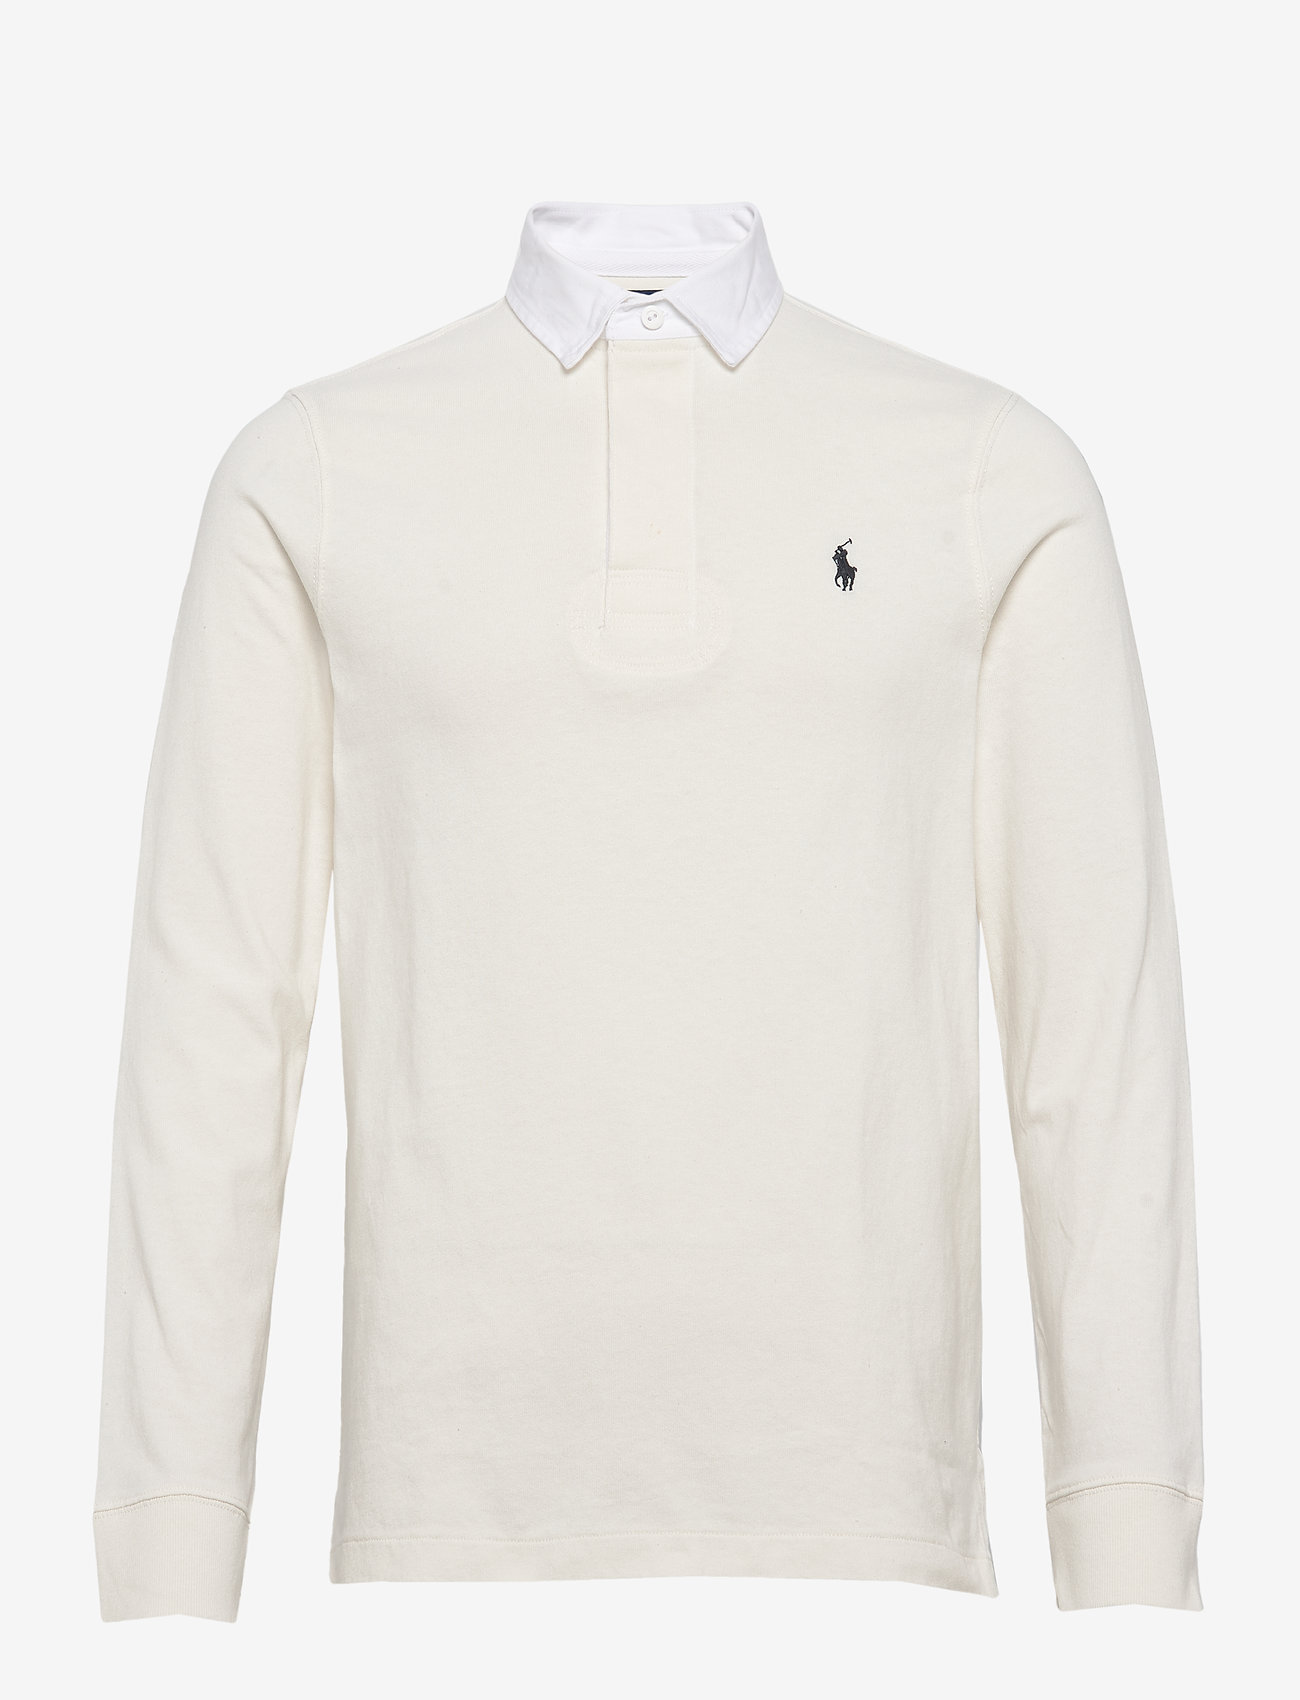 Polo Ralph Lauren The Iconic Rugby Shirt Best Sale, 53% OFF 